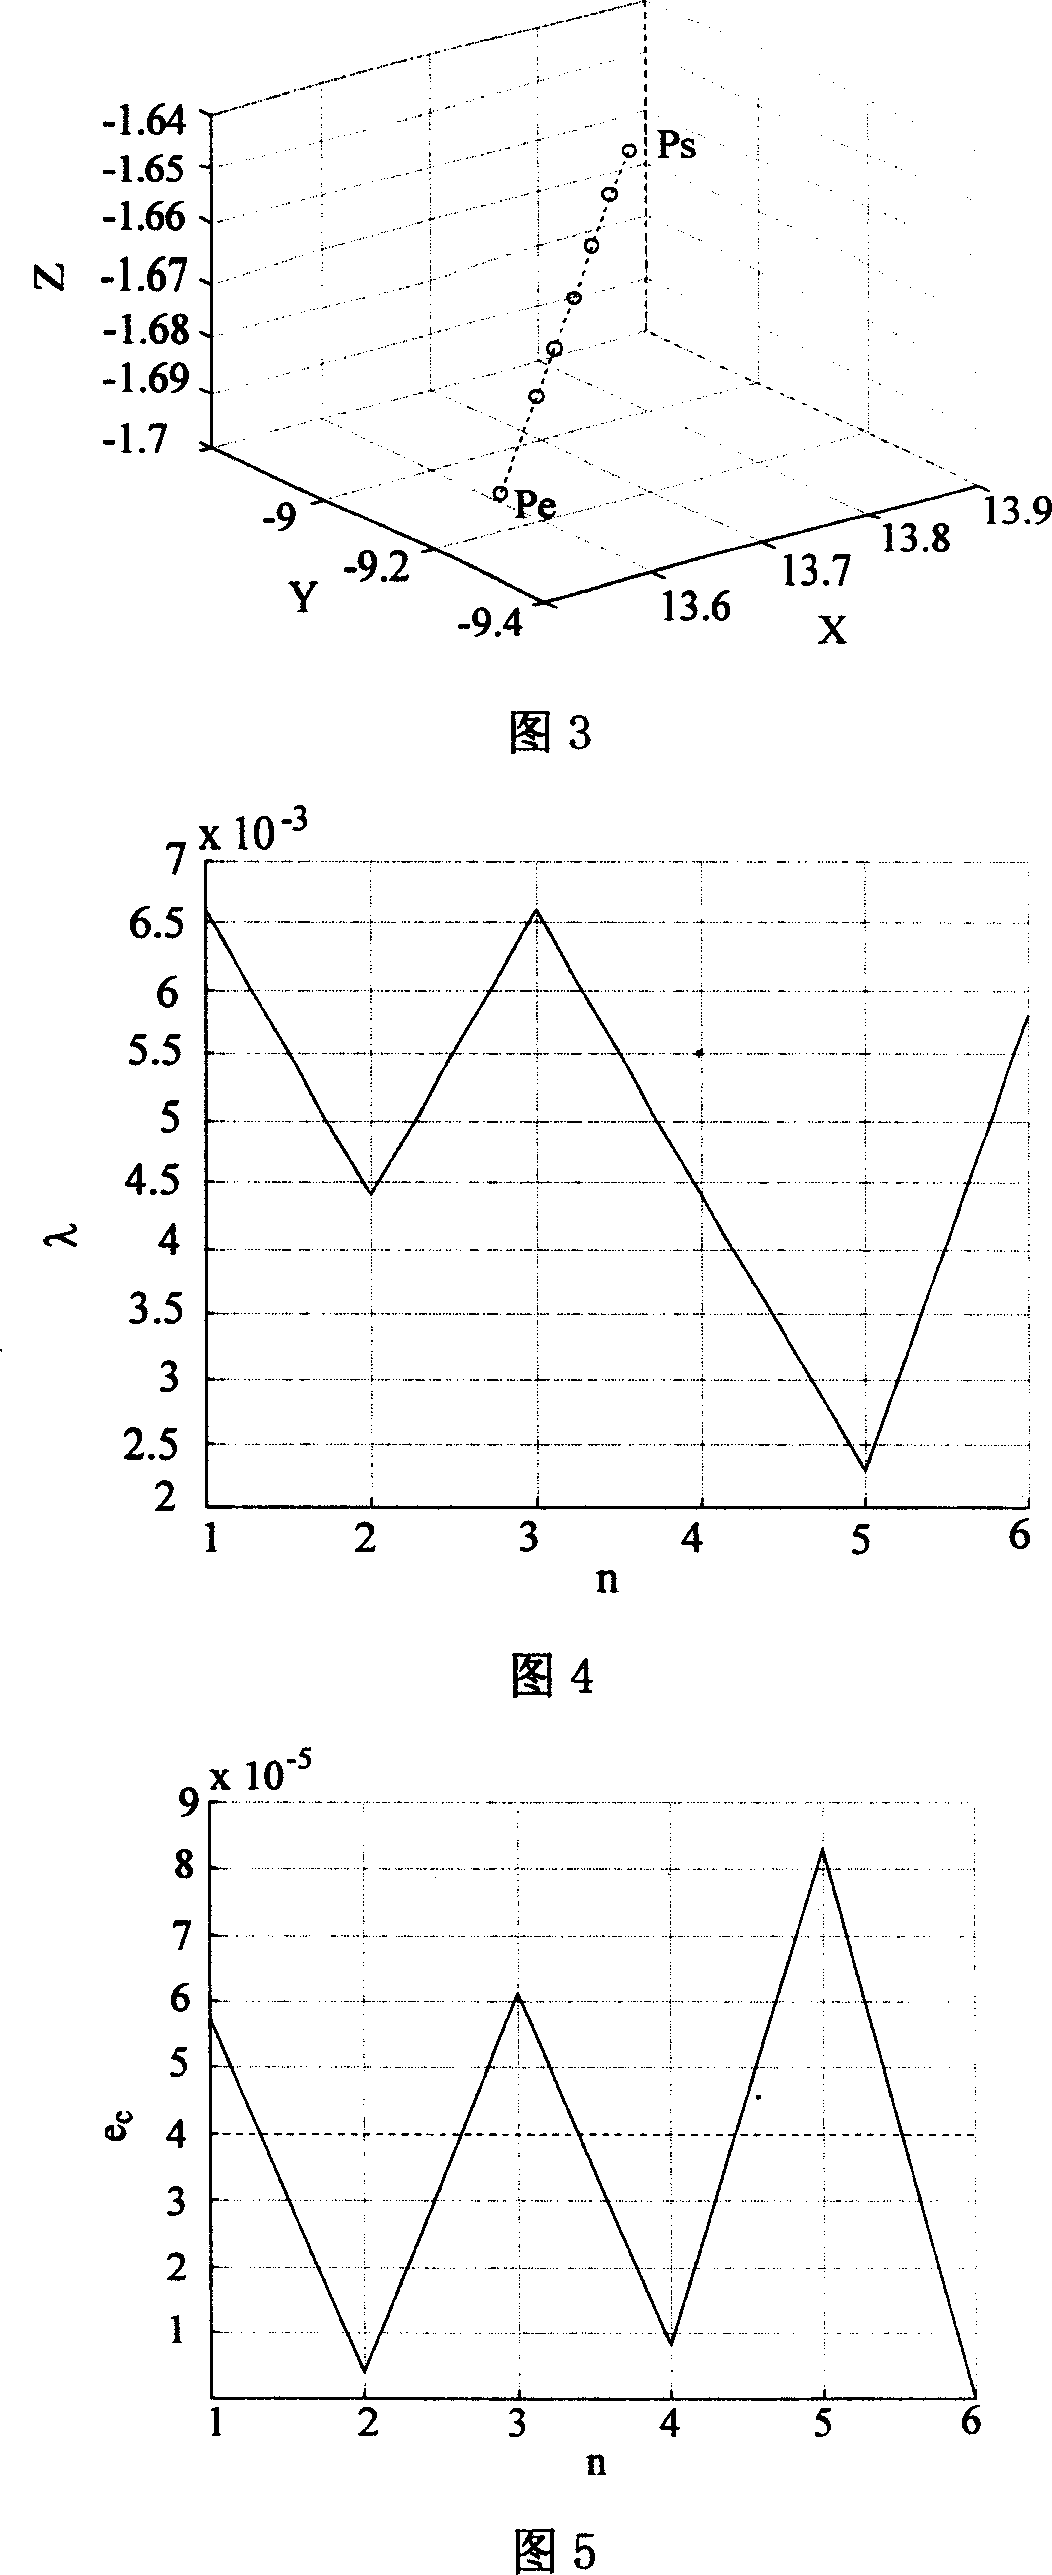 Air line interpolated method based on commixed realization of time split-run and figure integral method